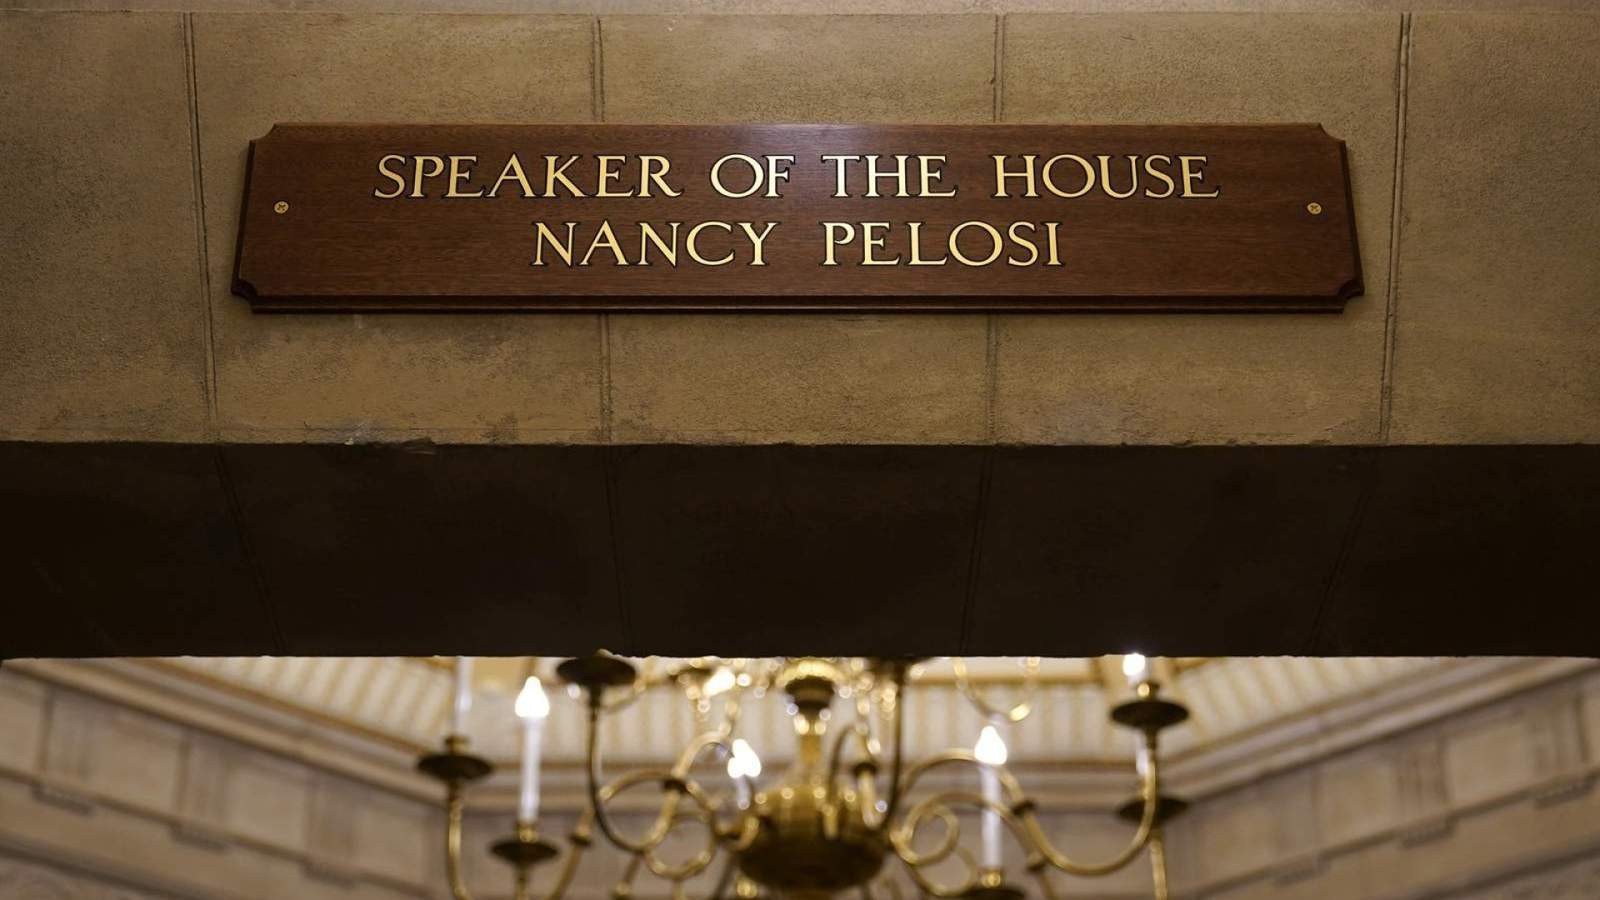 Woman accused of theft from Pelosi’s office during riot